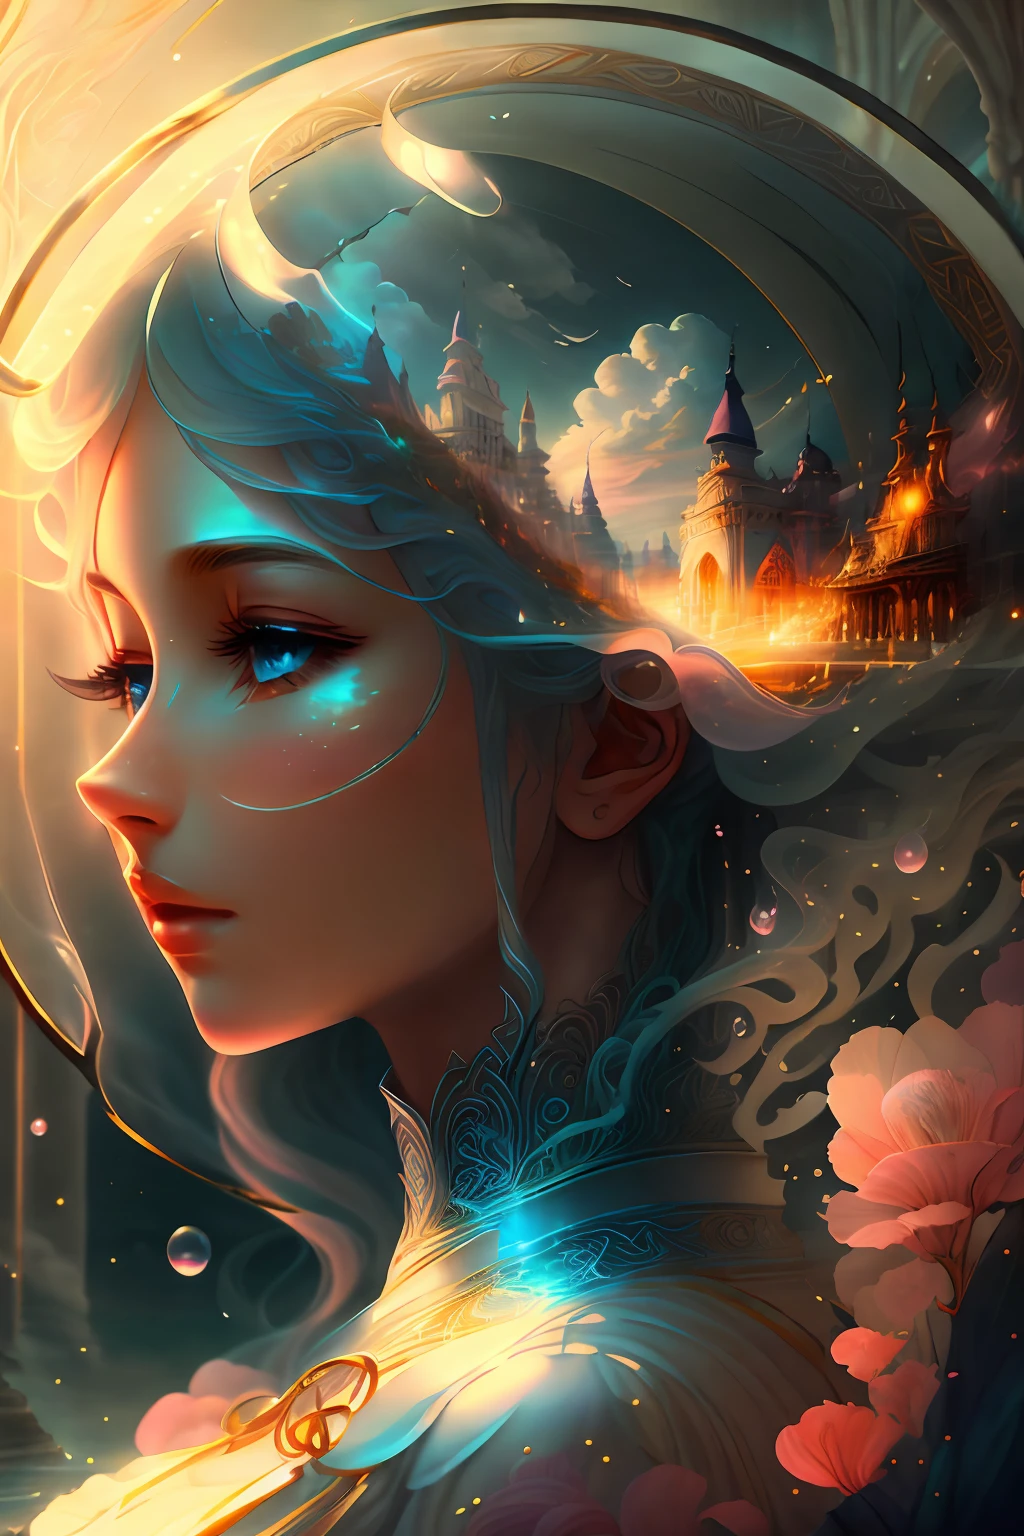 Build an image, beste-Qualit, Beautiful animated paintings, clouds, Beautiful page, Blue Eyes, pink hair, White Clothes, Neck embellishment, Water Watermark Glass, stairs, light, Wind light, Beautiful lighting and shadow transitions, The landscape is blurry because